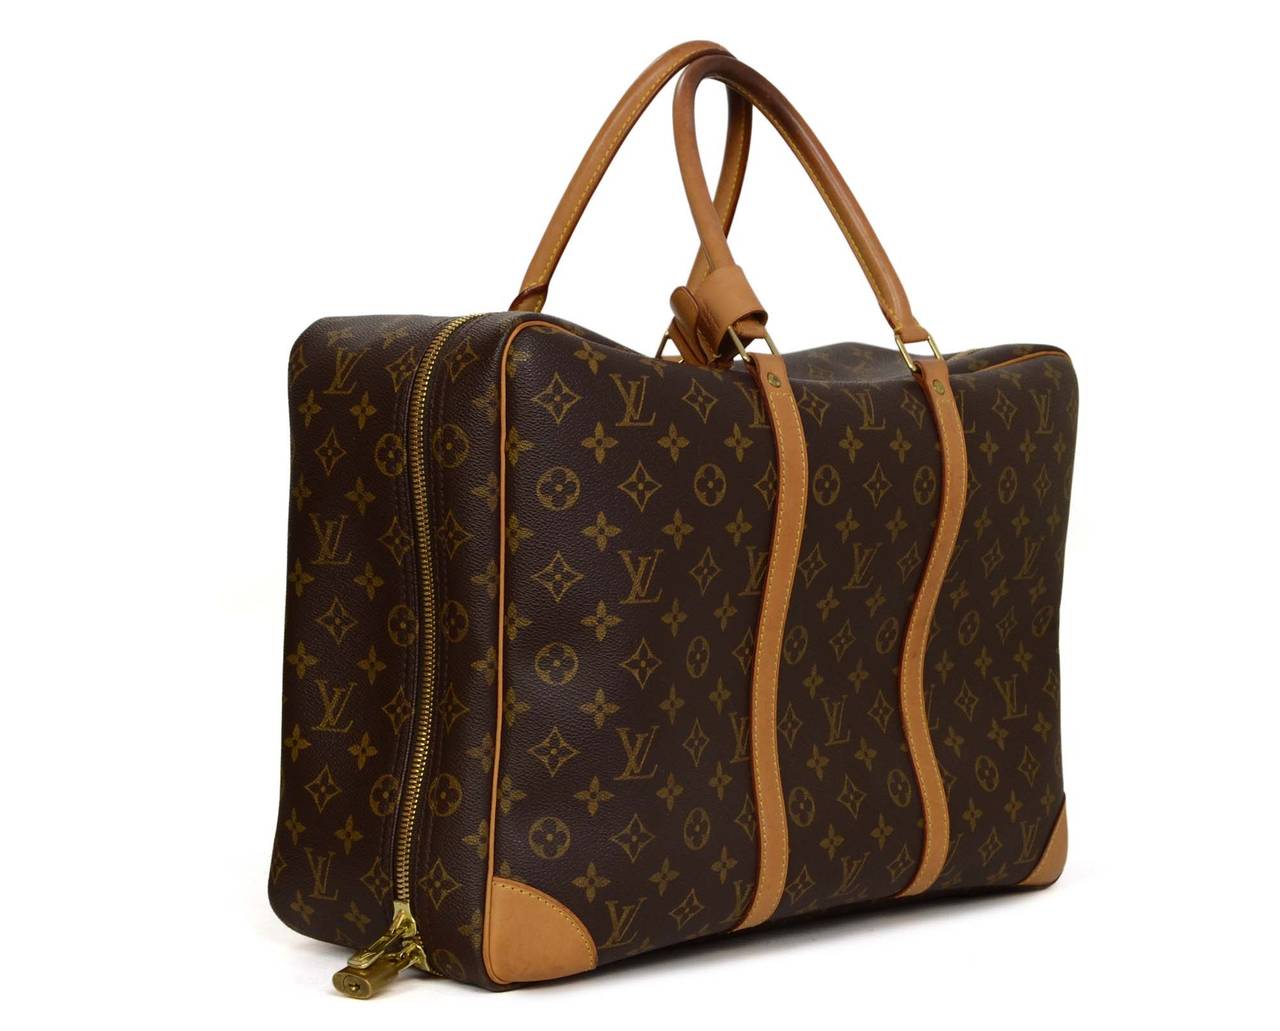 Louis Vuitton Monogram Canvas Sirius 45 Luggage
Made in: France
Year of Production: 2003
Color: Brown, tan and goldtone
Hardware: Goldtone
Materials: Coated canvas, leather and metal
Lining: Beige textile
Closure/opening: Double zip around